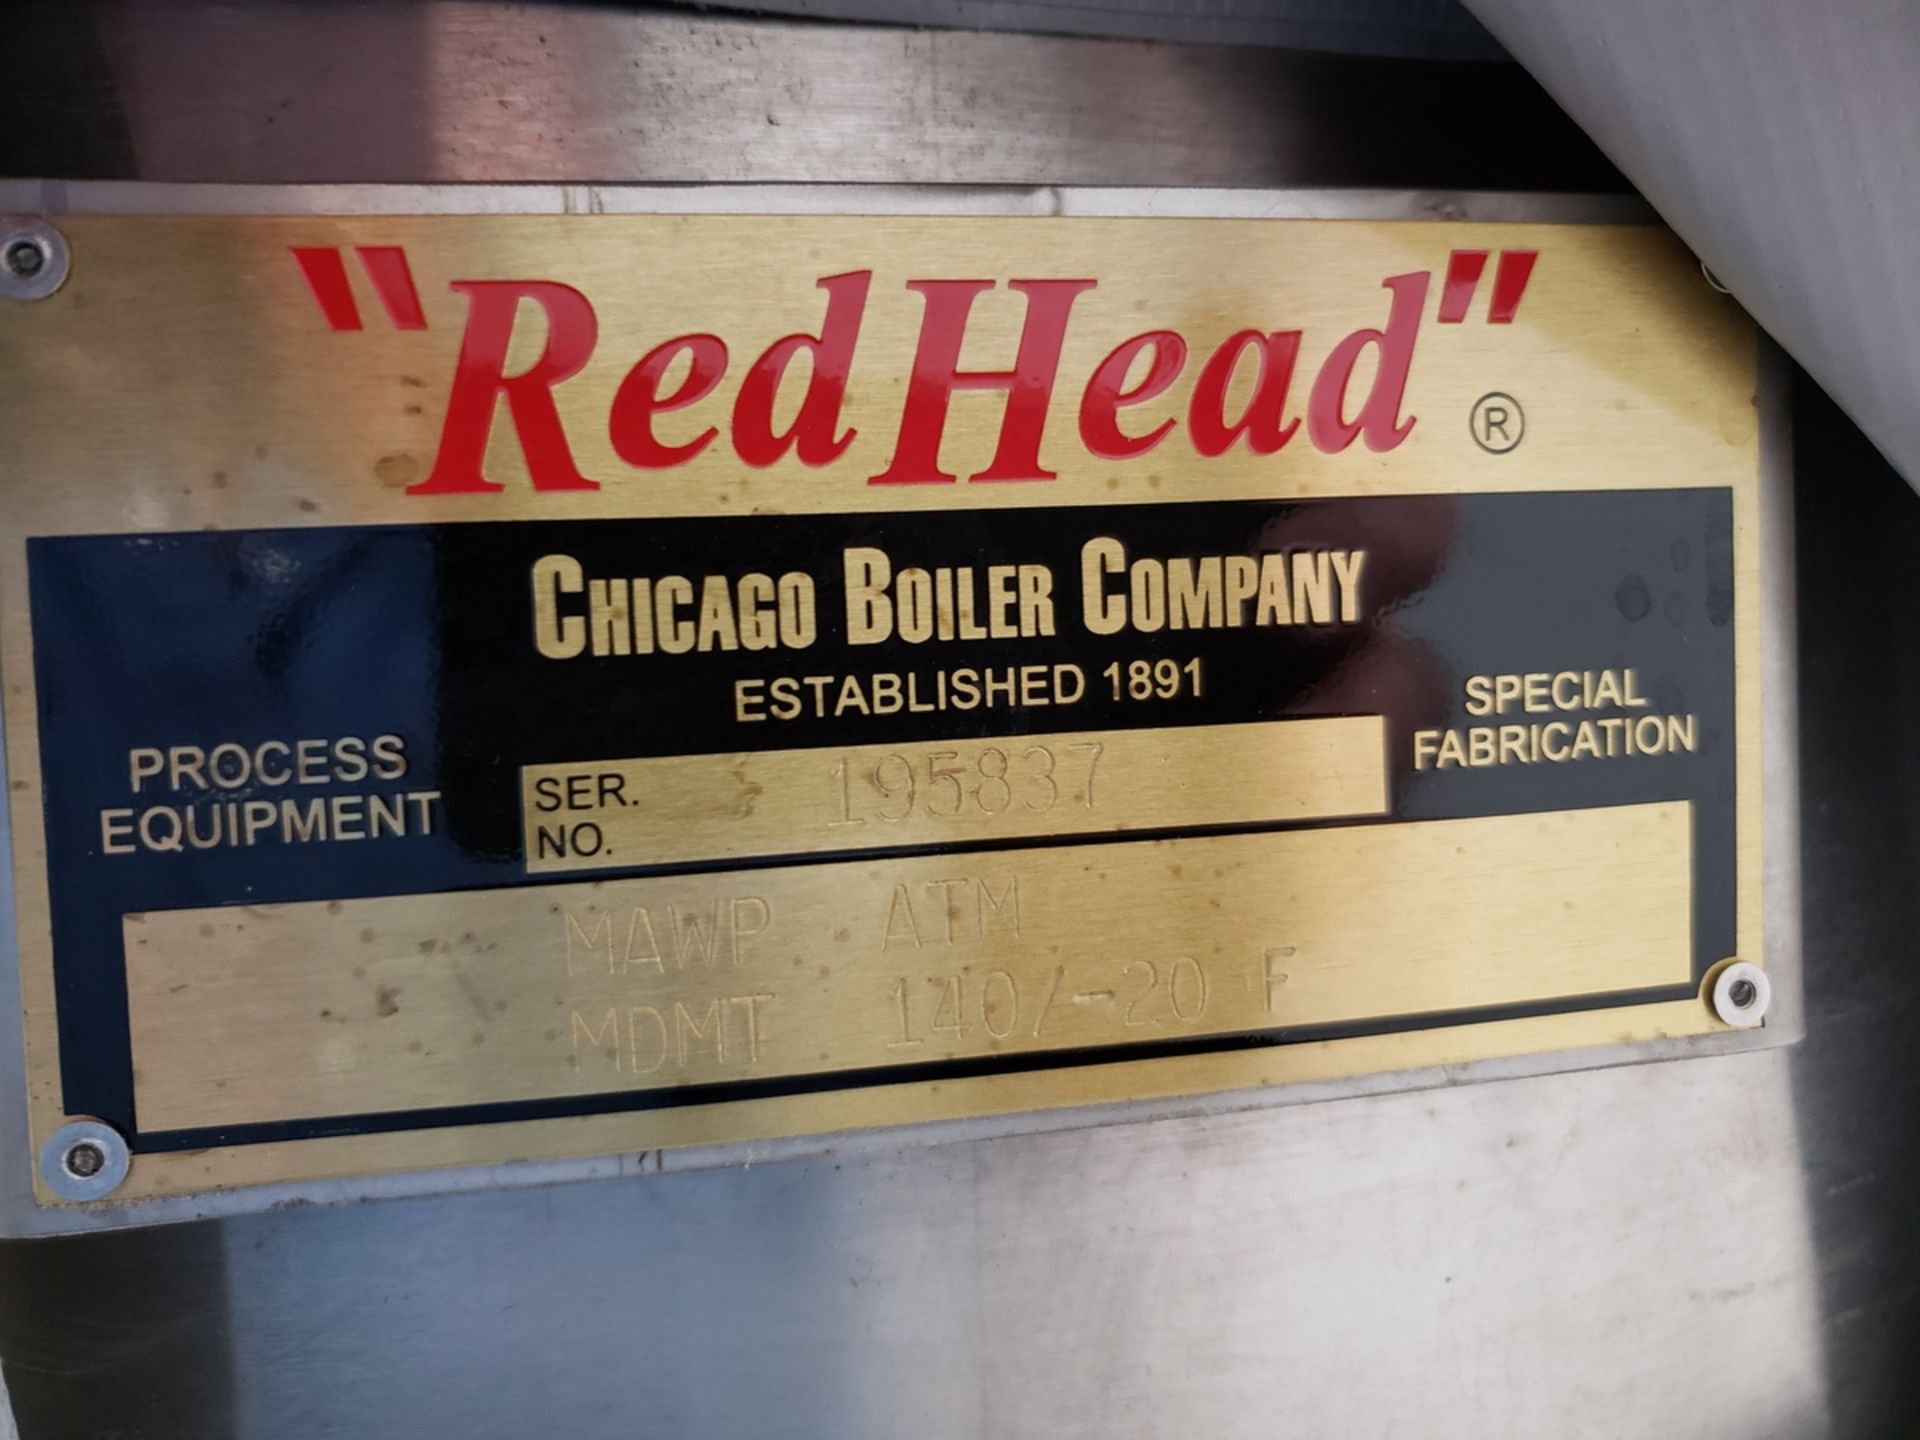 Chicago Boiler/Red Head 550 Liter Agitated Stainless Steel Oil Transport Tank, S/N | Rig Fee $25 - Image 2 of 2